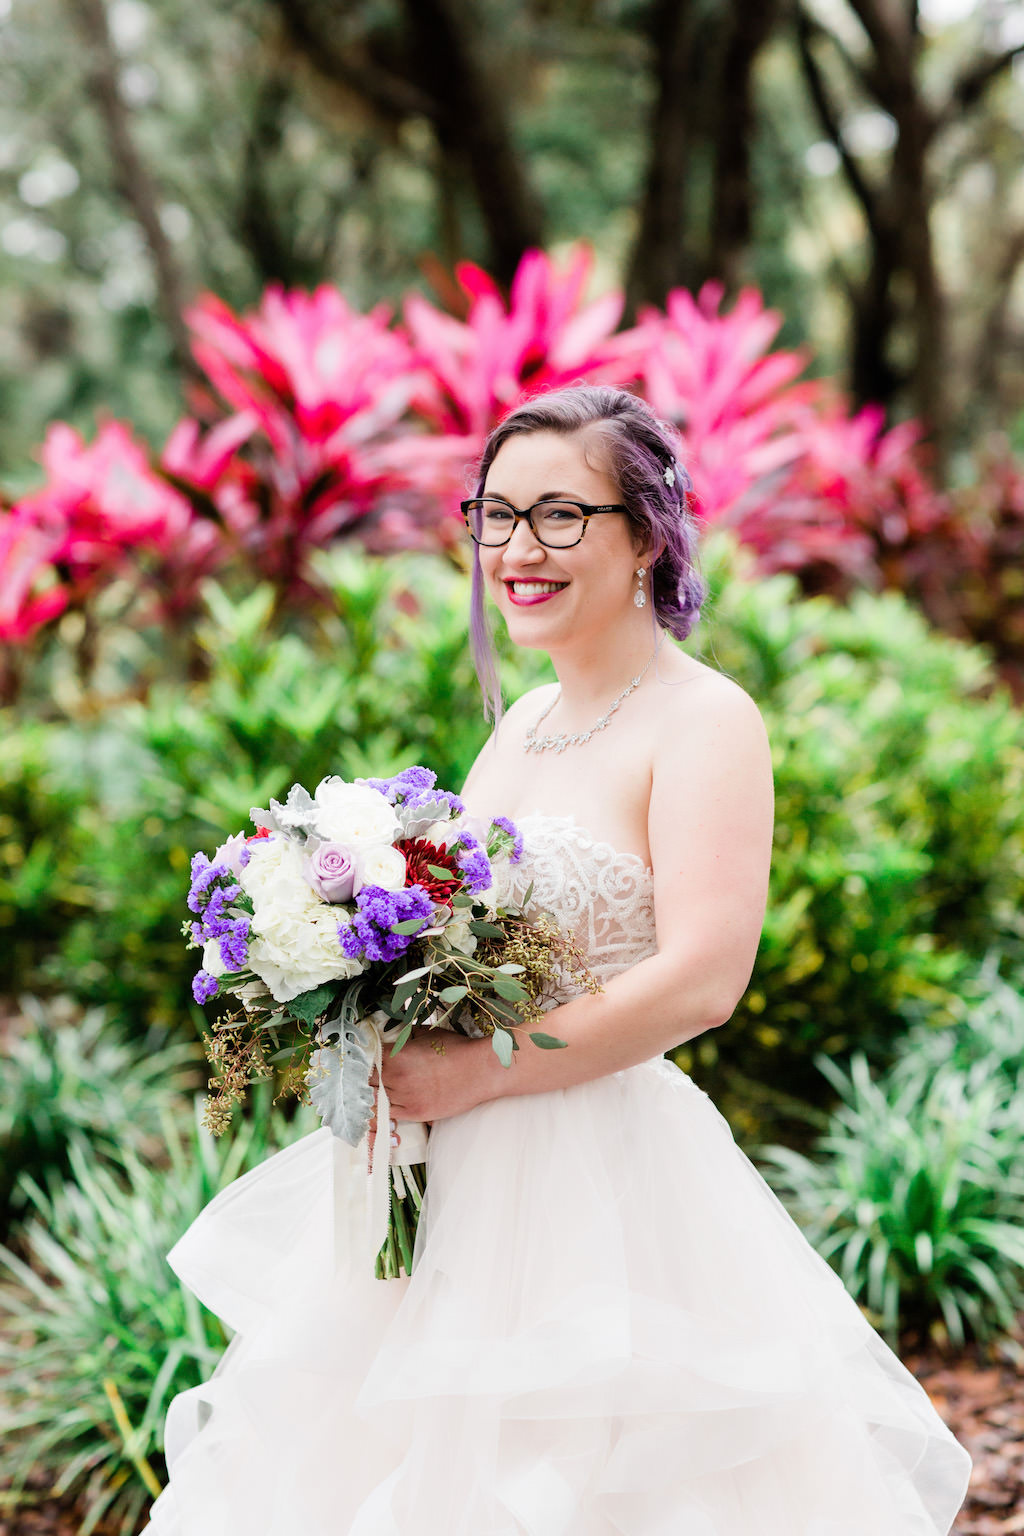 Modern, Romantic Florida Bride in Ballgown Wedding Dress, Unique Wedding Style with Purple Hair and Glasses, Holding Whimsical Bridal Bouquet, Purple, Ivory, White, Red, Flowers with Greenery